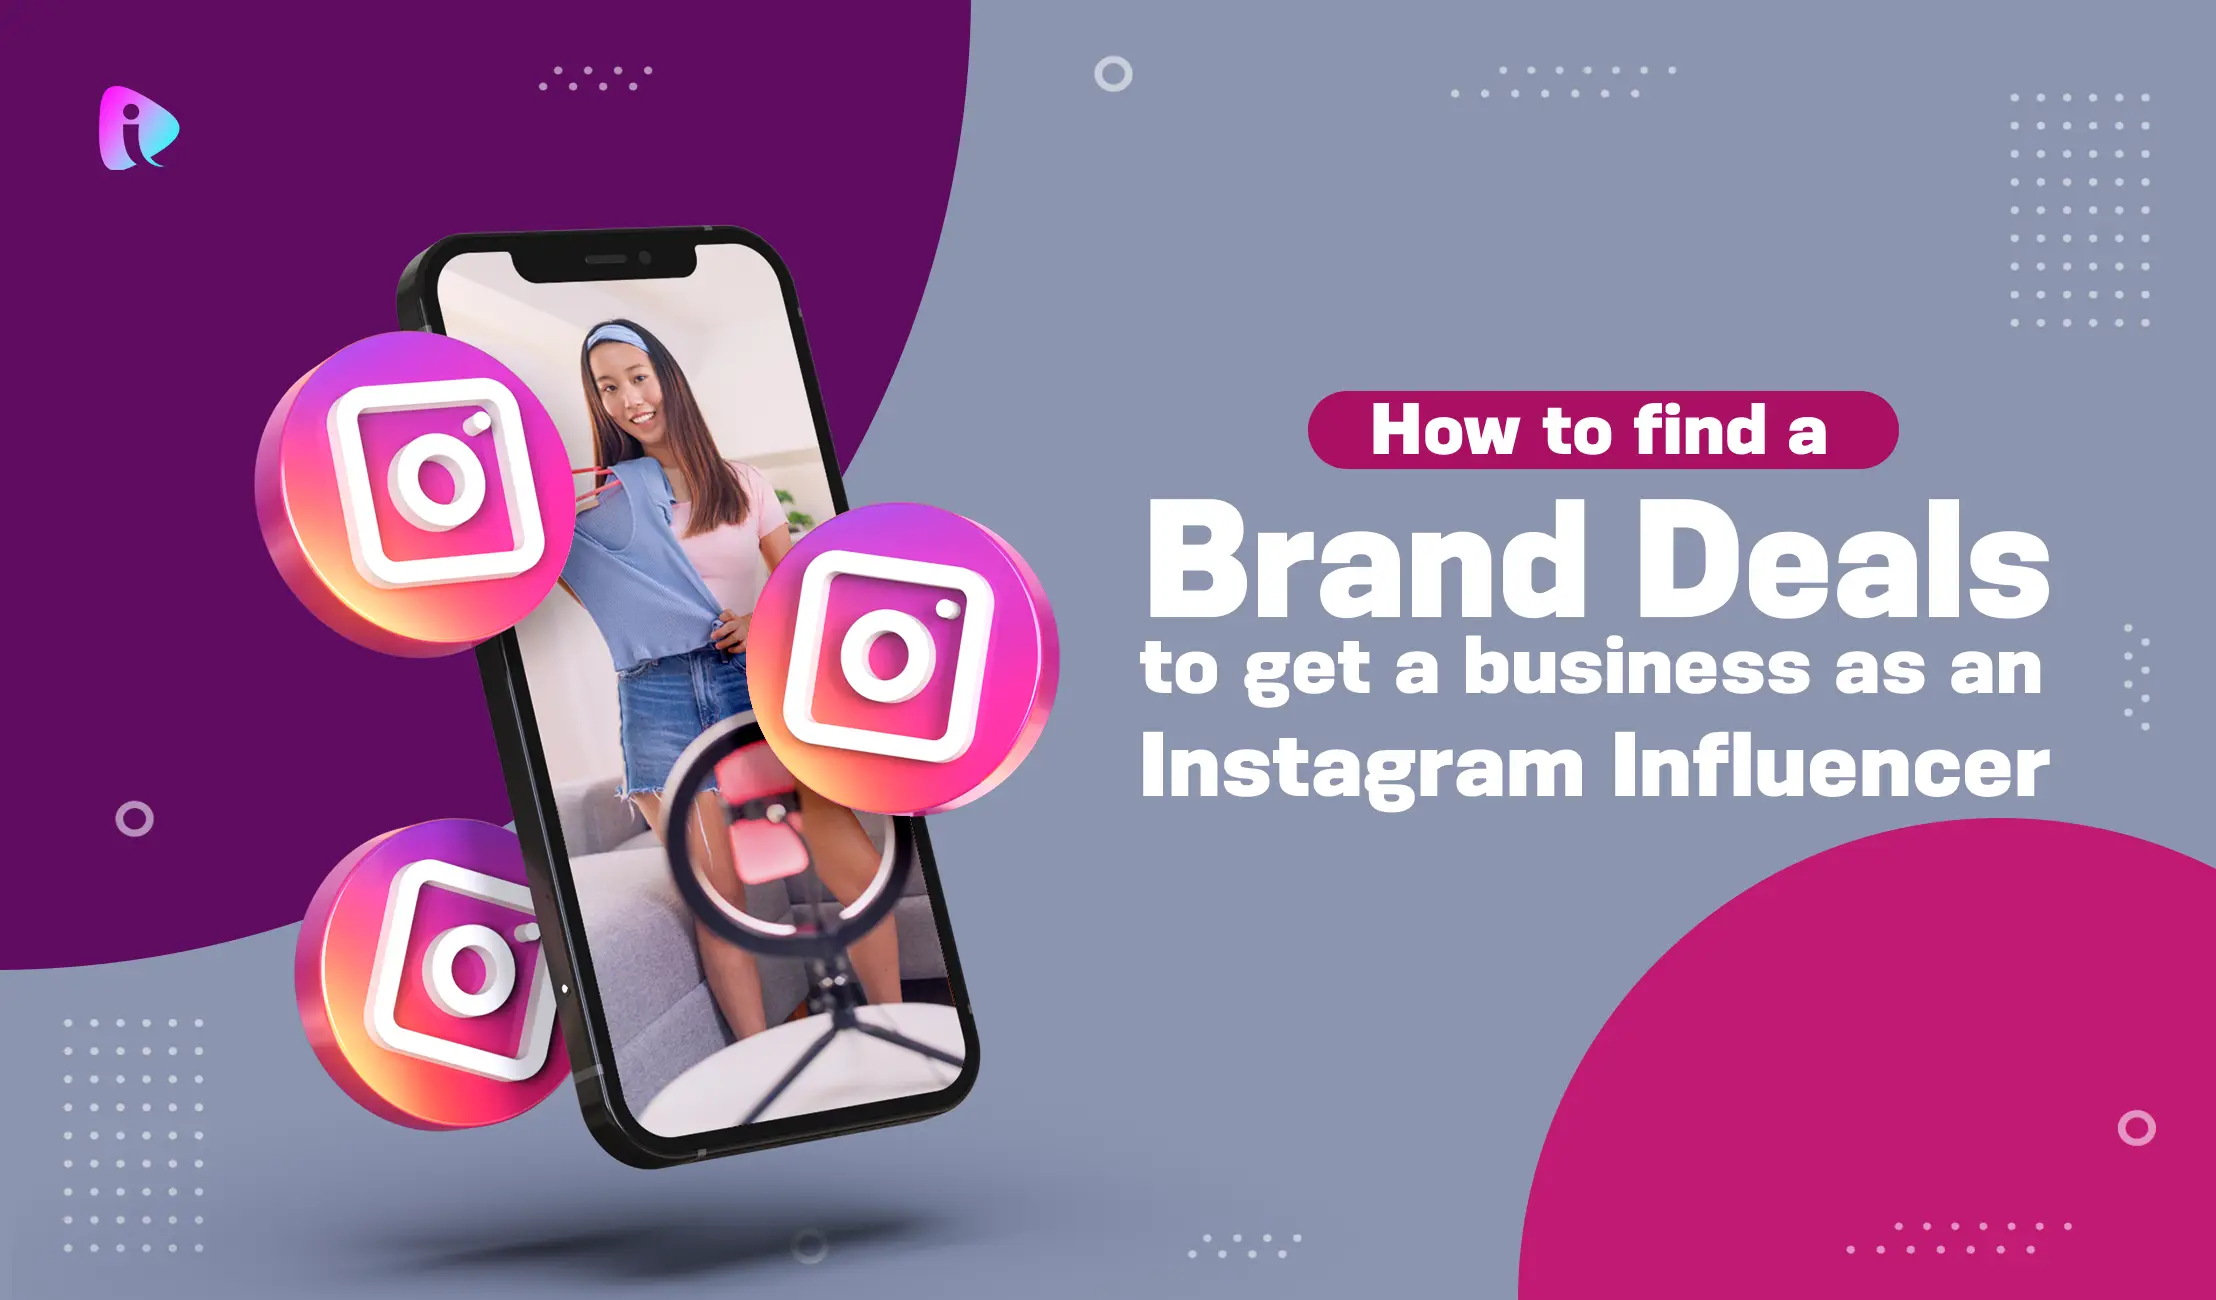 How Instagram Influencers Can Find Brand Deals for Business Growth